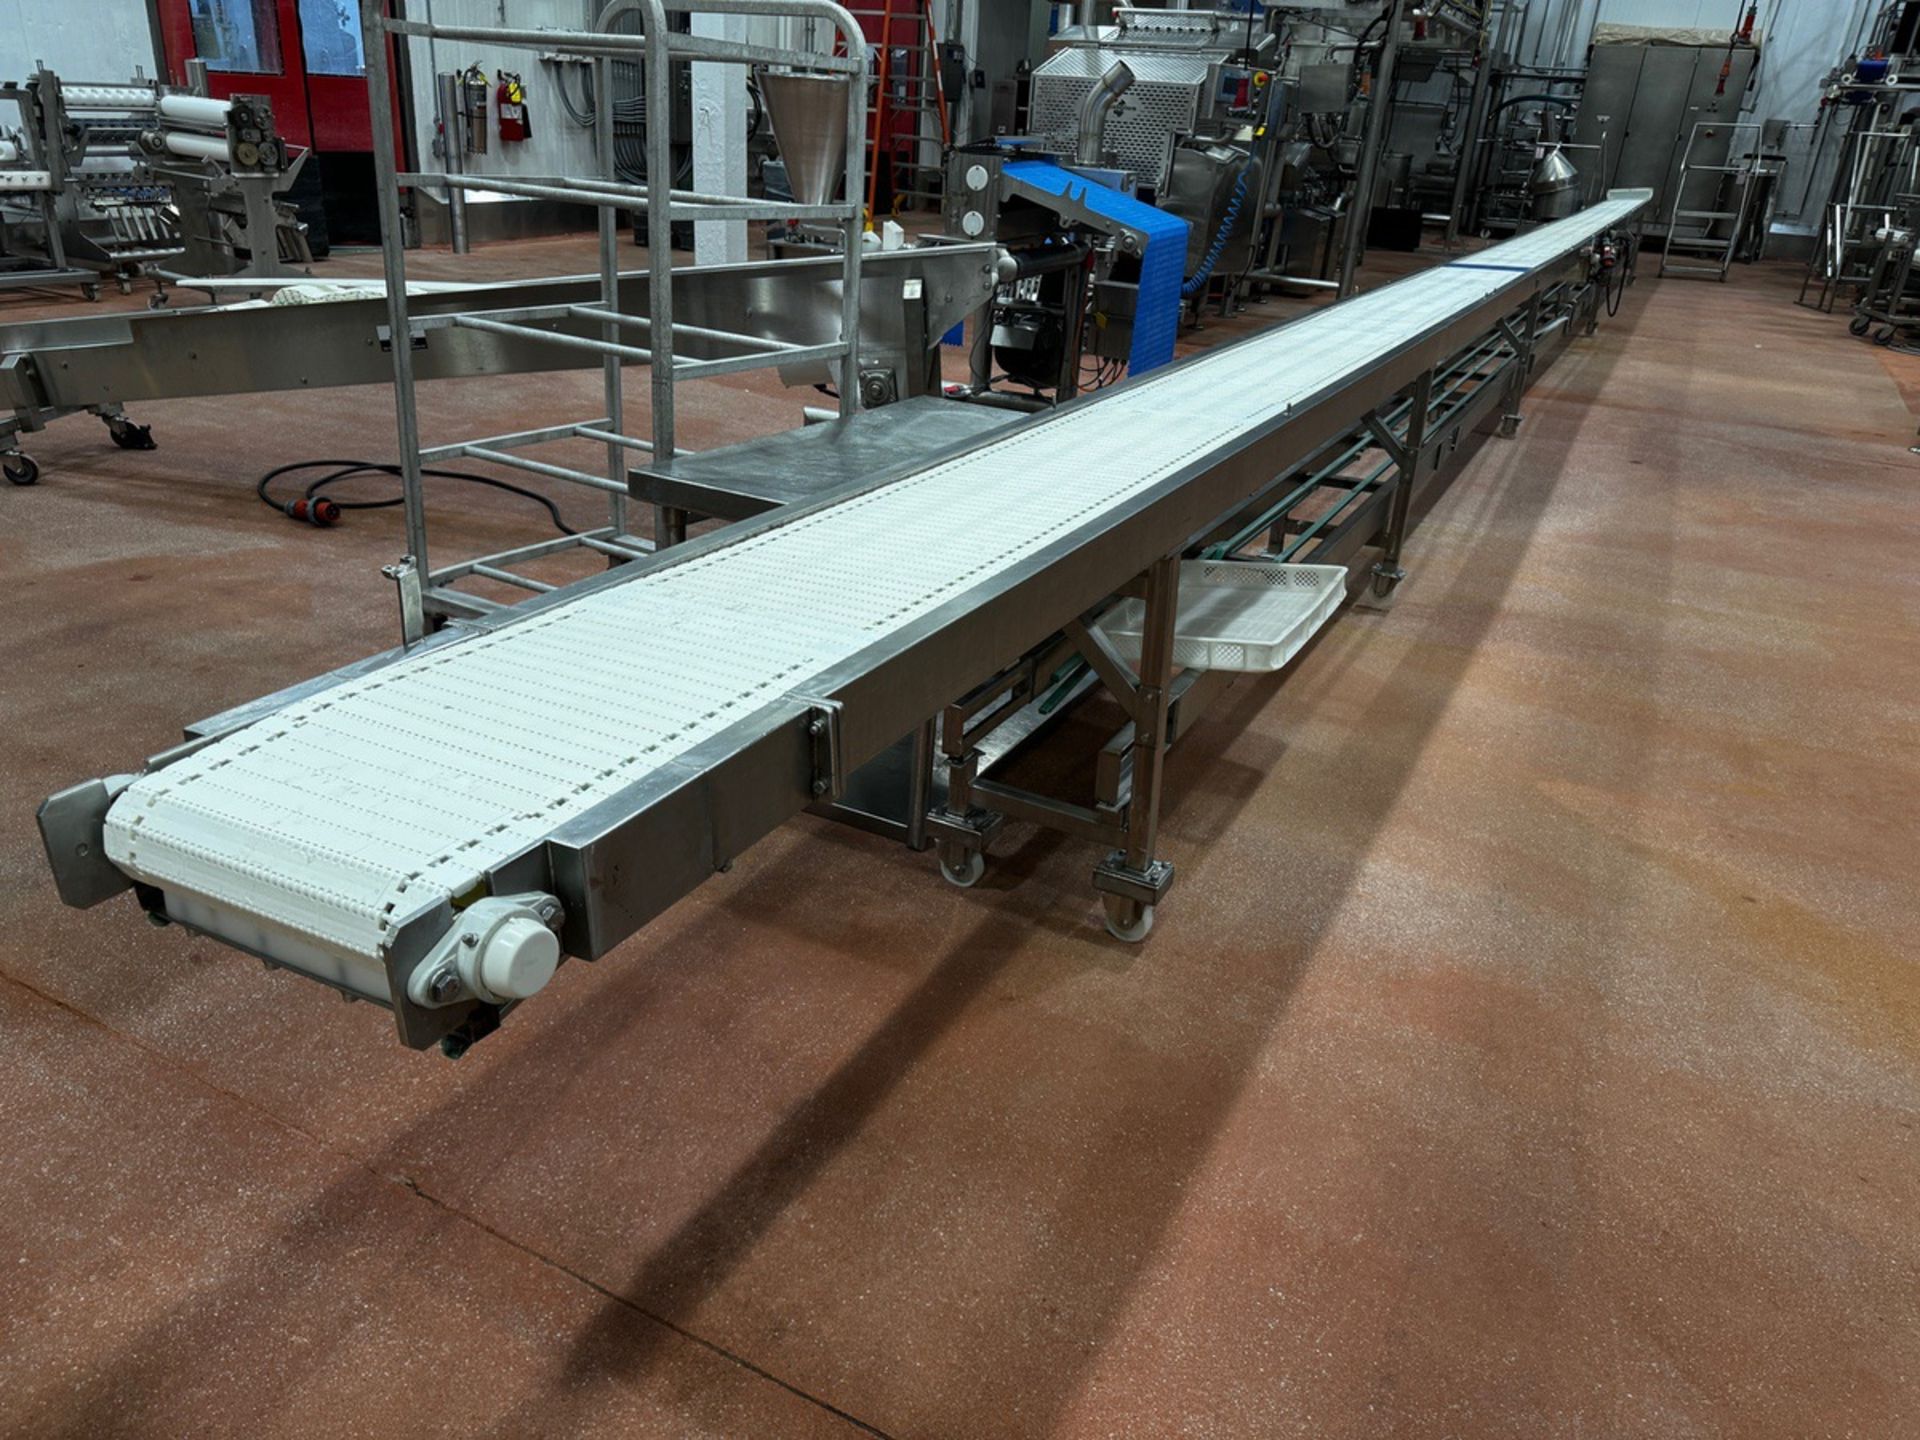 Stainless Steel Frame Conveyor Mounted on Casters, 14"W x 56' OA Length